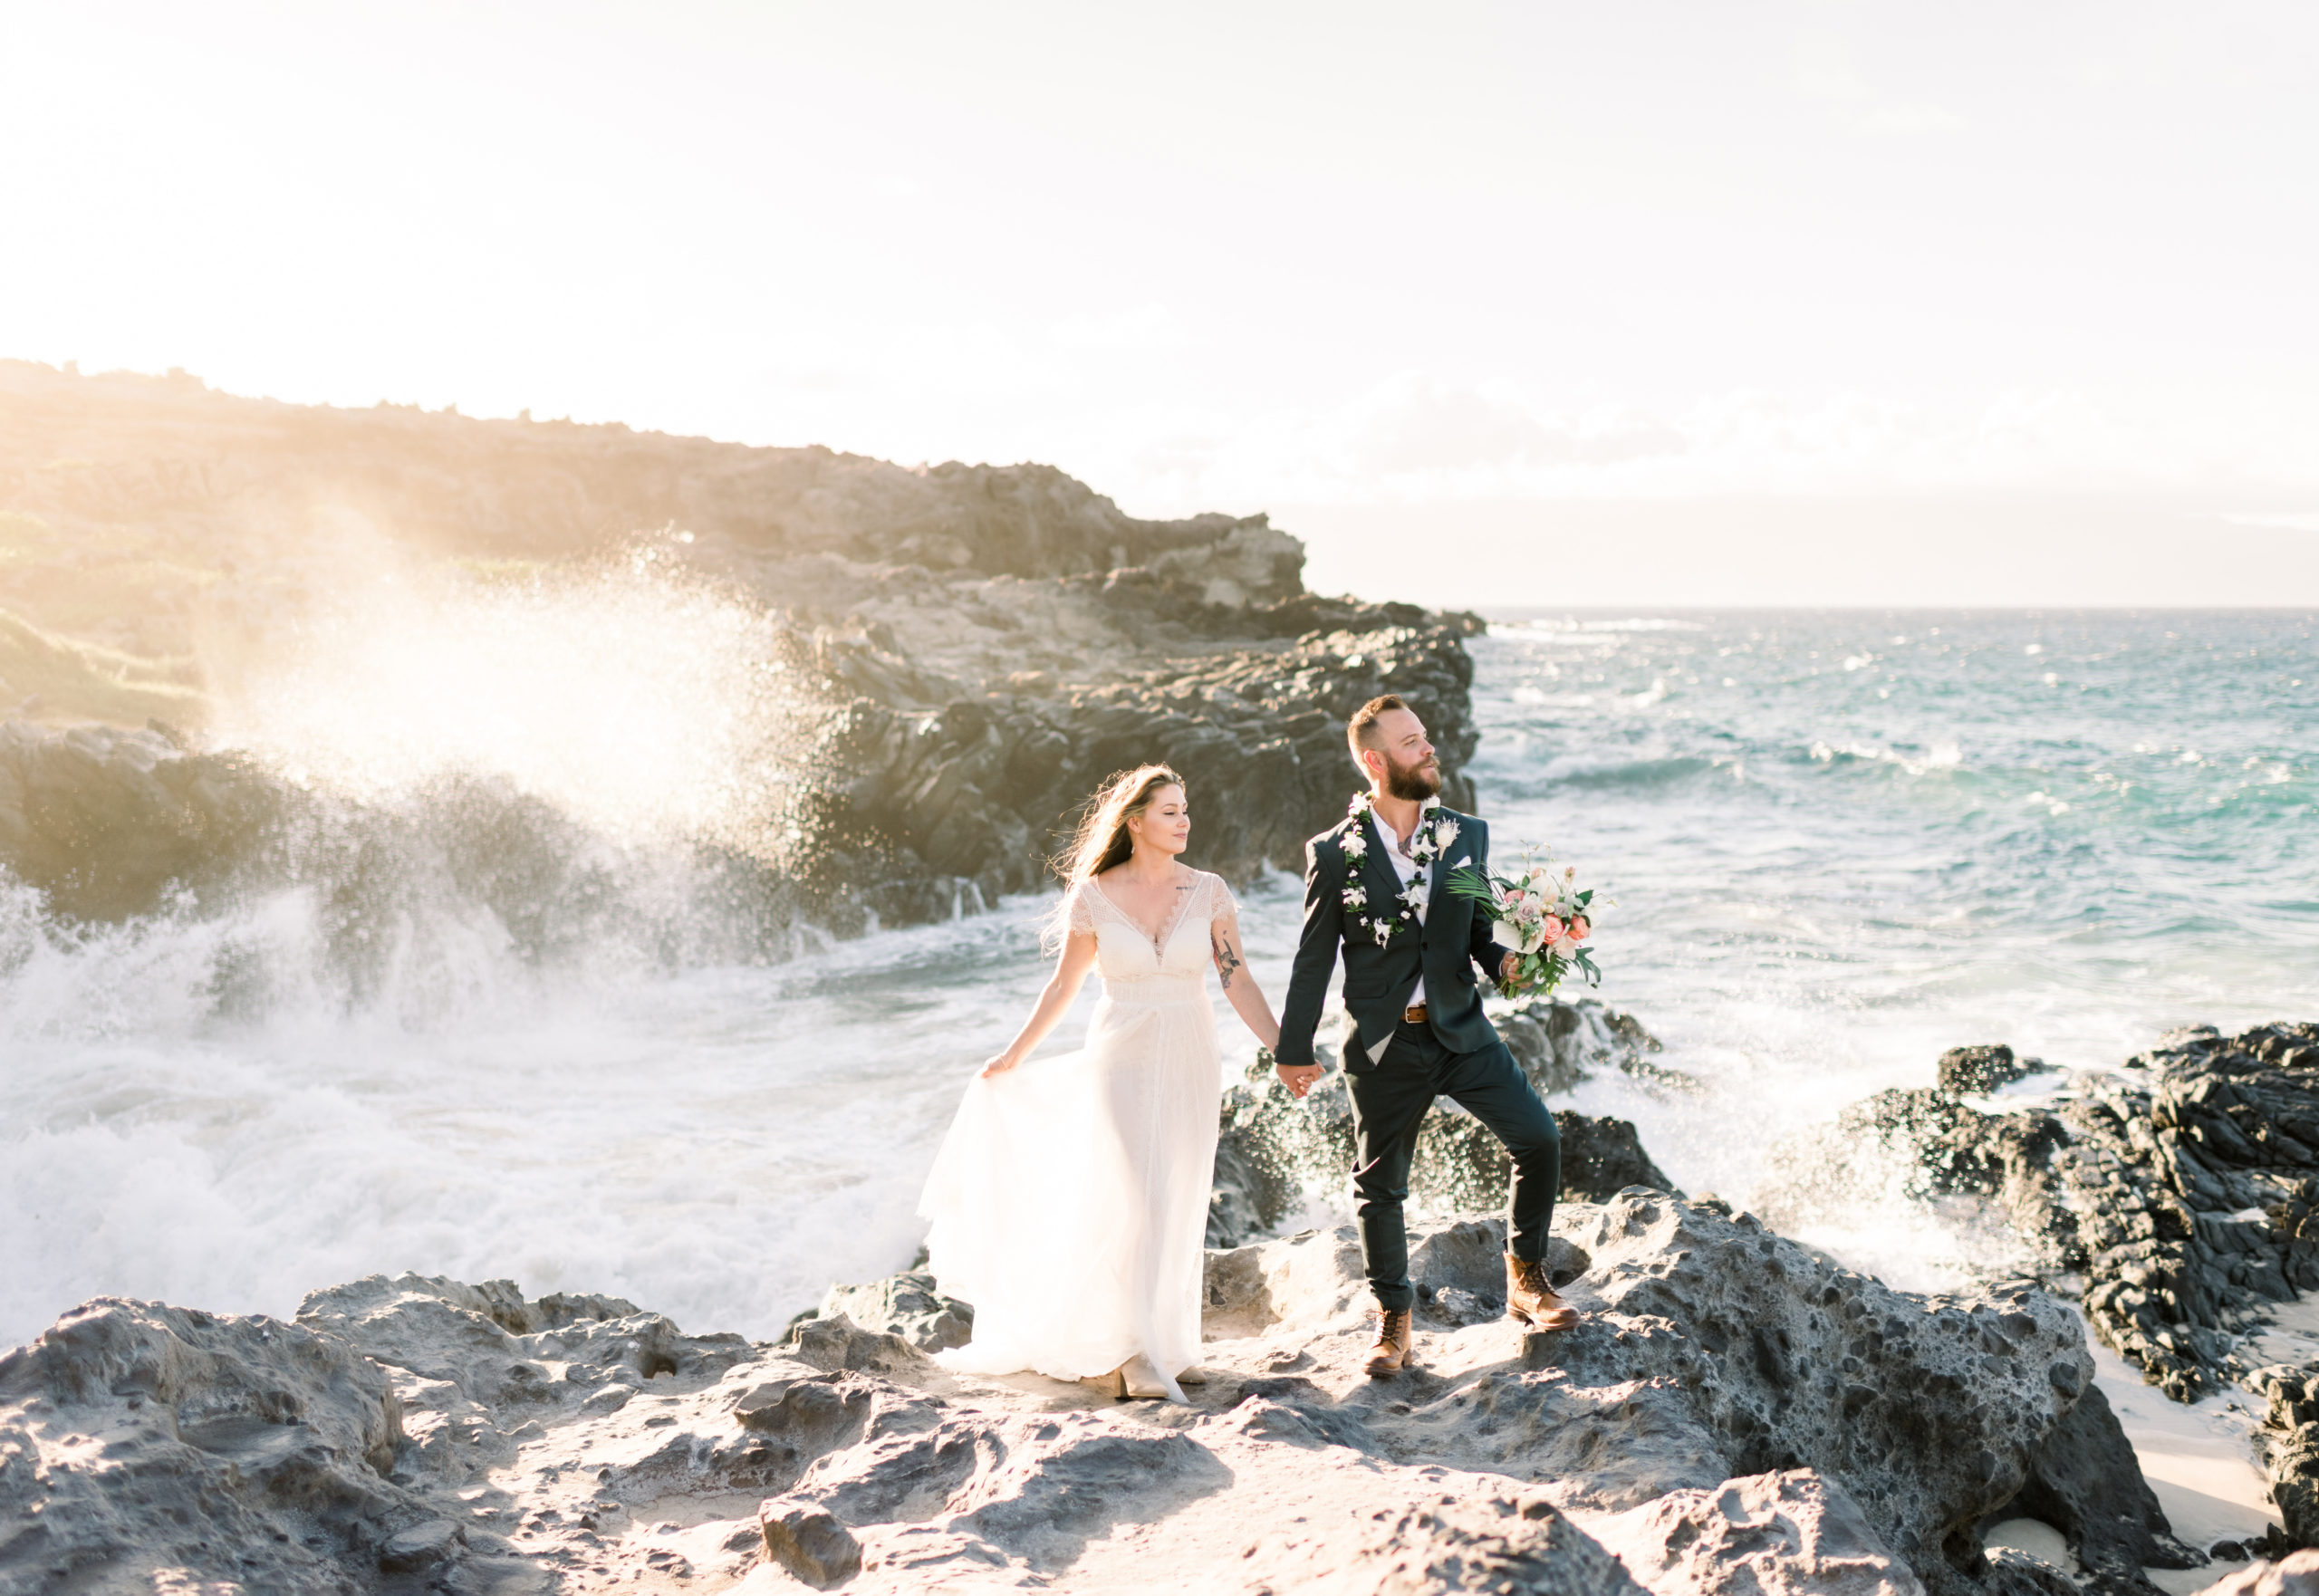 West Maui Elopement Images of husband and wife standing side by side on lava rocks holding hands